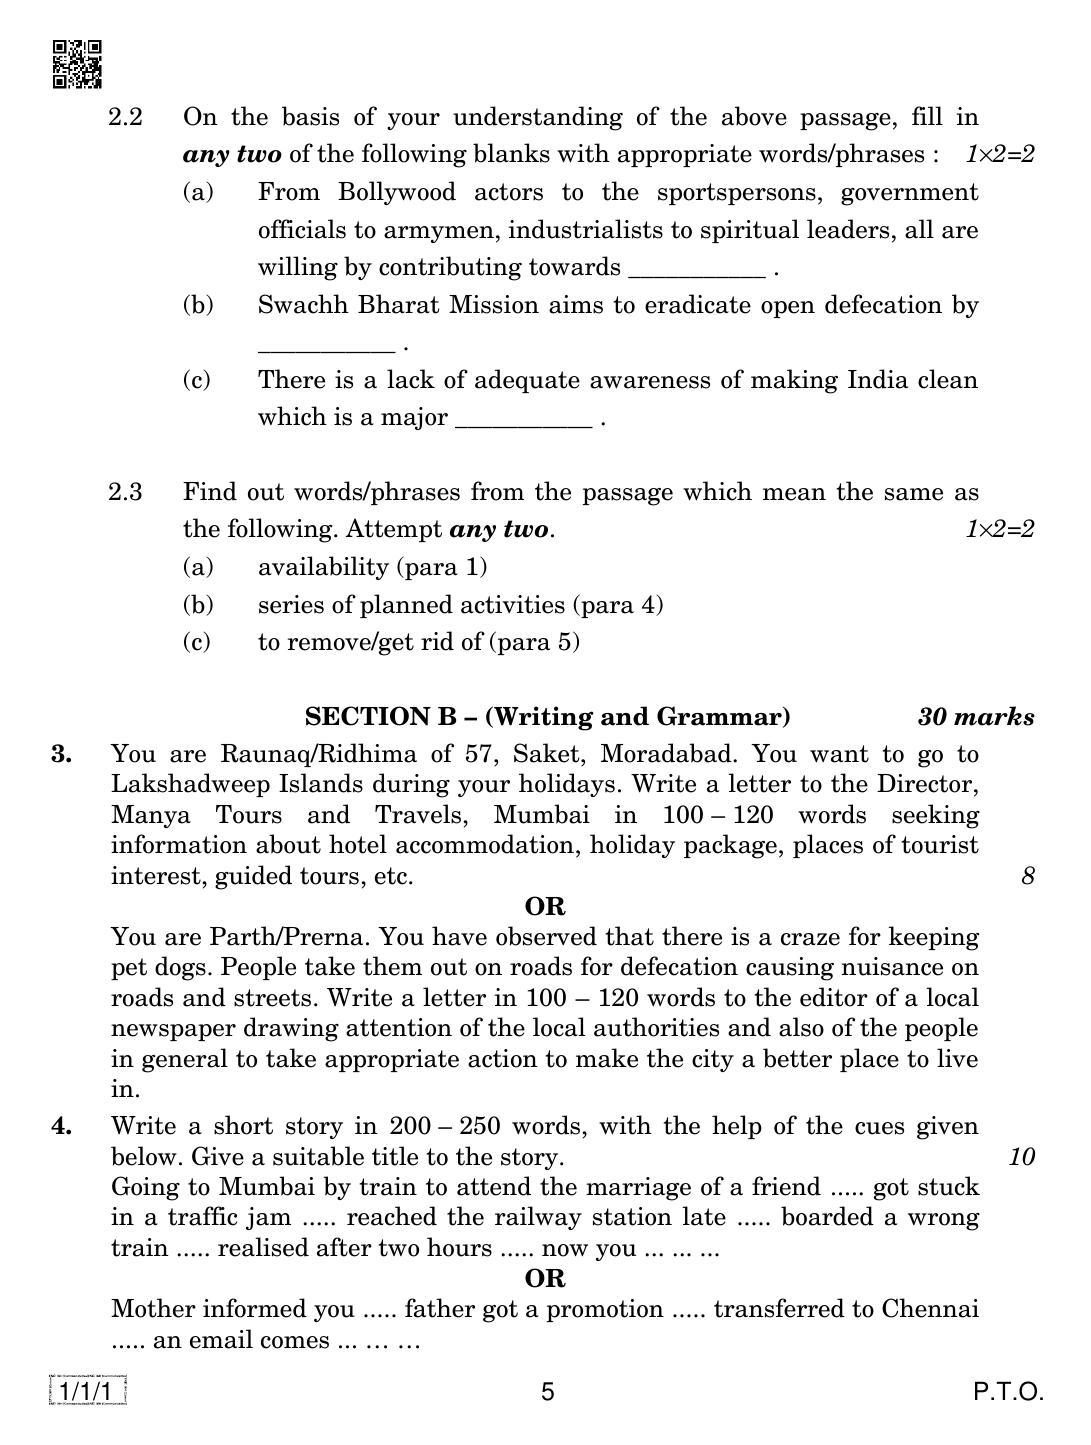 CBSE Class 10 1-1-1 ENGLISH COMM. 2019 Compartment Question Paper - Page 5